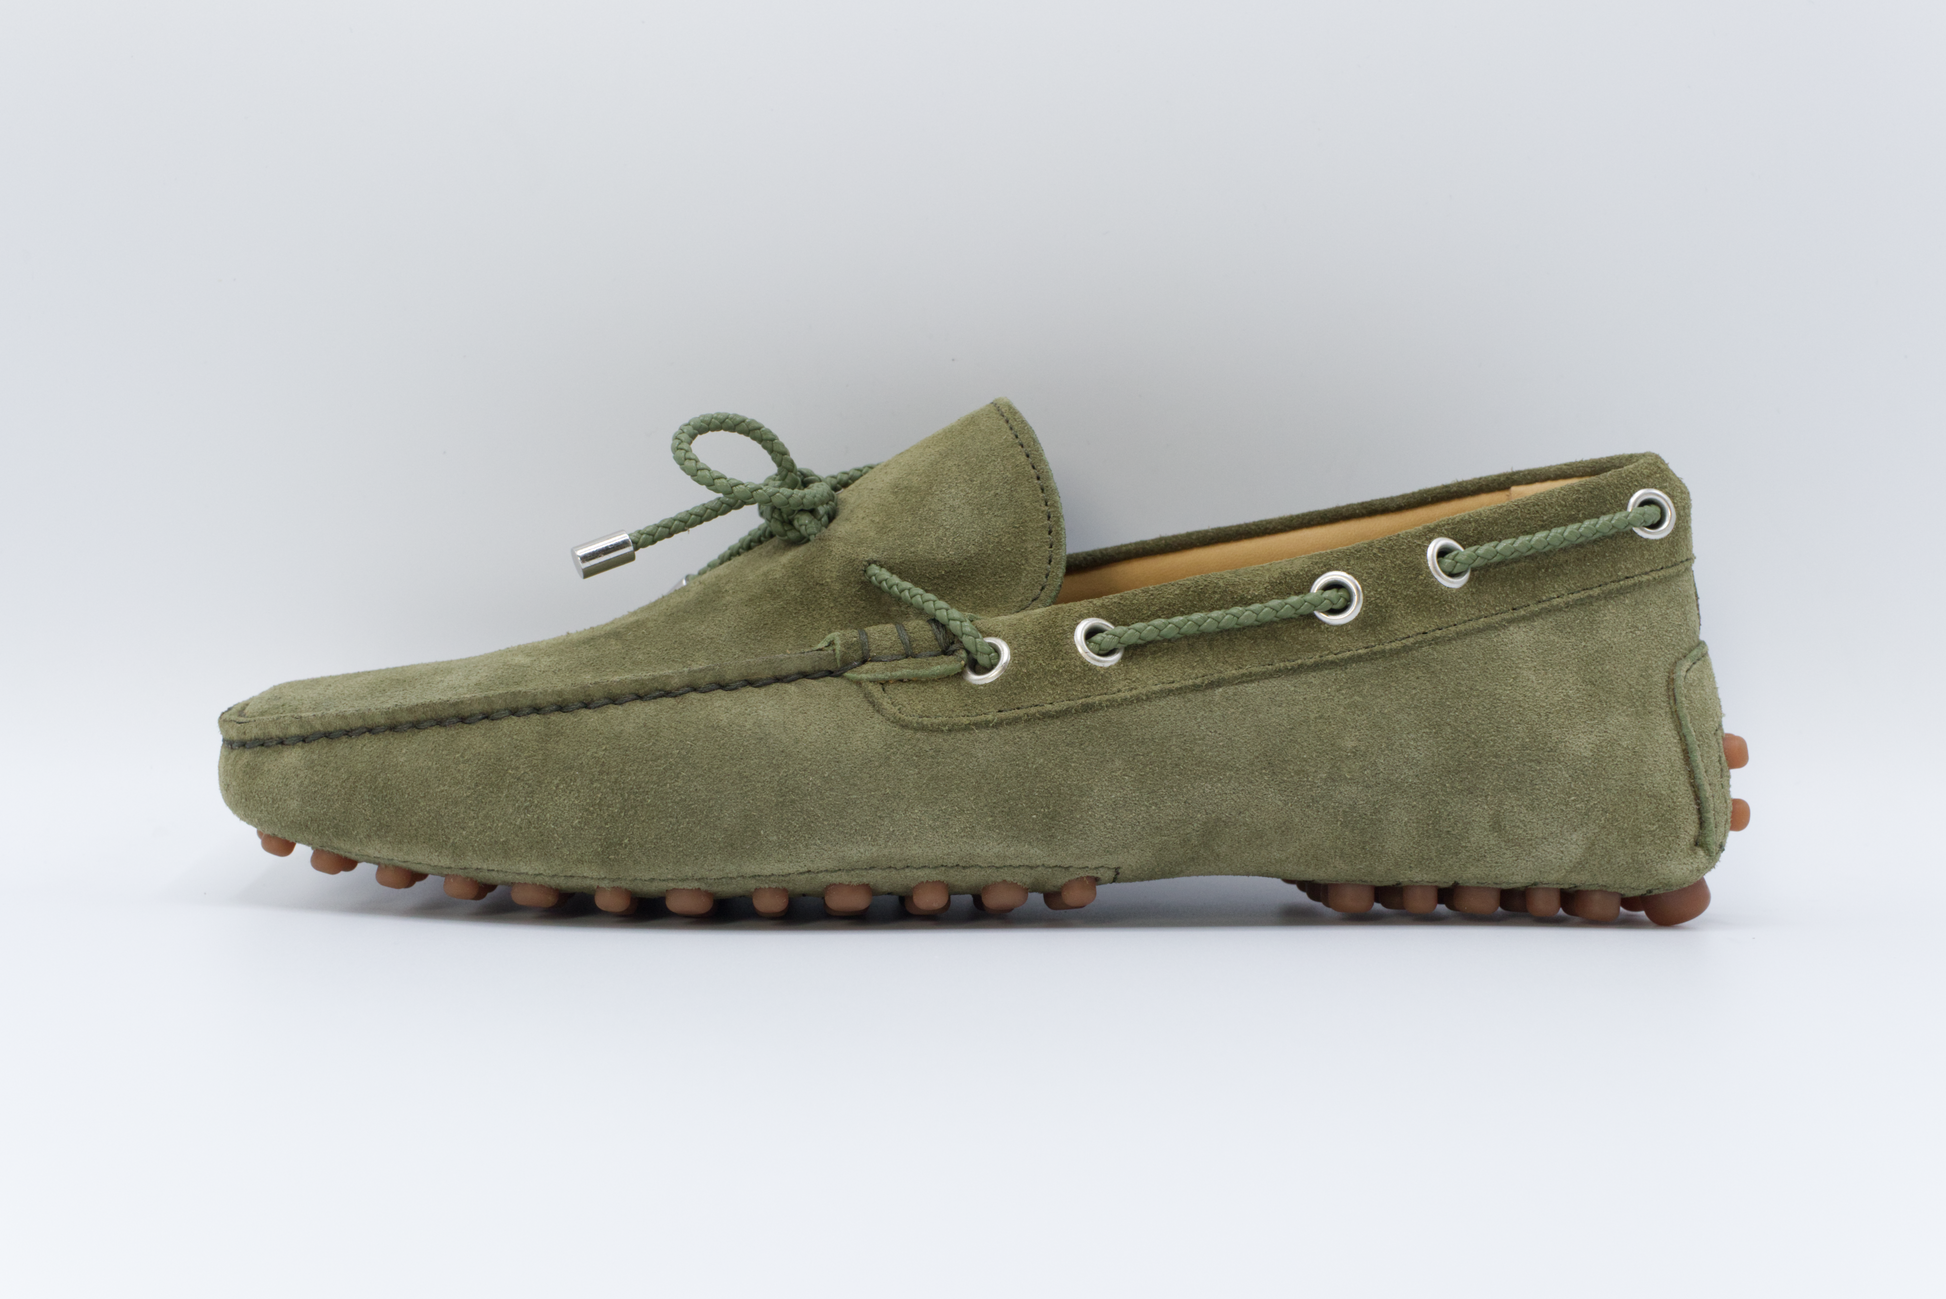 Shop Handmade Men's Calf Leather Suede Loafer in Light Green or browse our range of hand-made Italian sneakers for men in leather or suede. We deliver to the USA and Canada & offer multiple payment plans as well as accept multiple safe & secure payment methods. Confort07